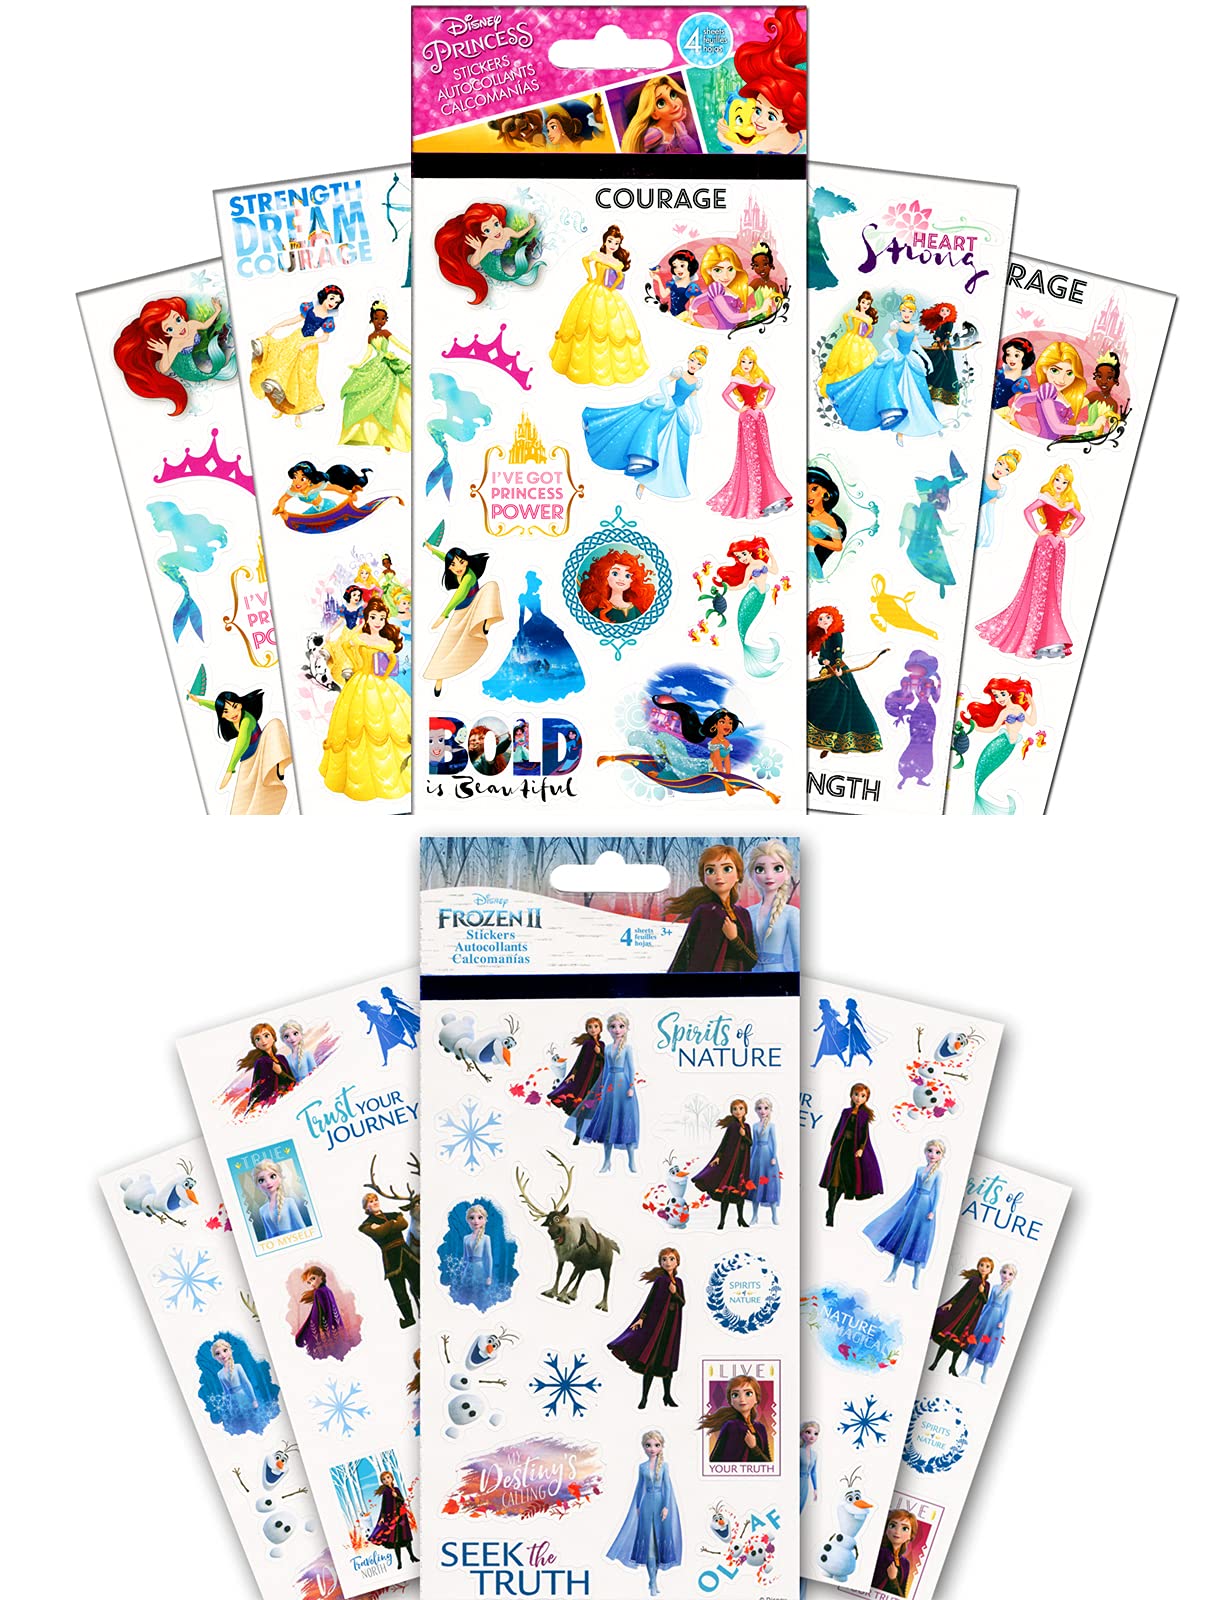 Disney Princess Coloring Book Set for Kids - Activities, Stickers and Games - Featuring Disney Princess, Frozen, Moana and Raya and The Last Dragon